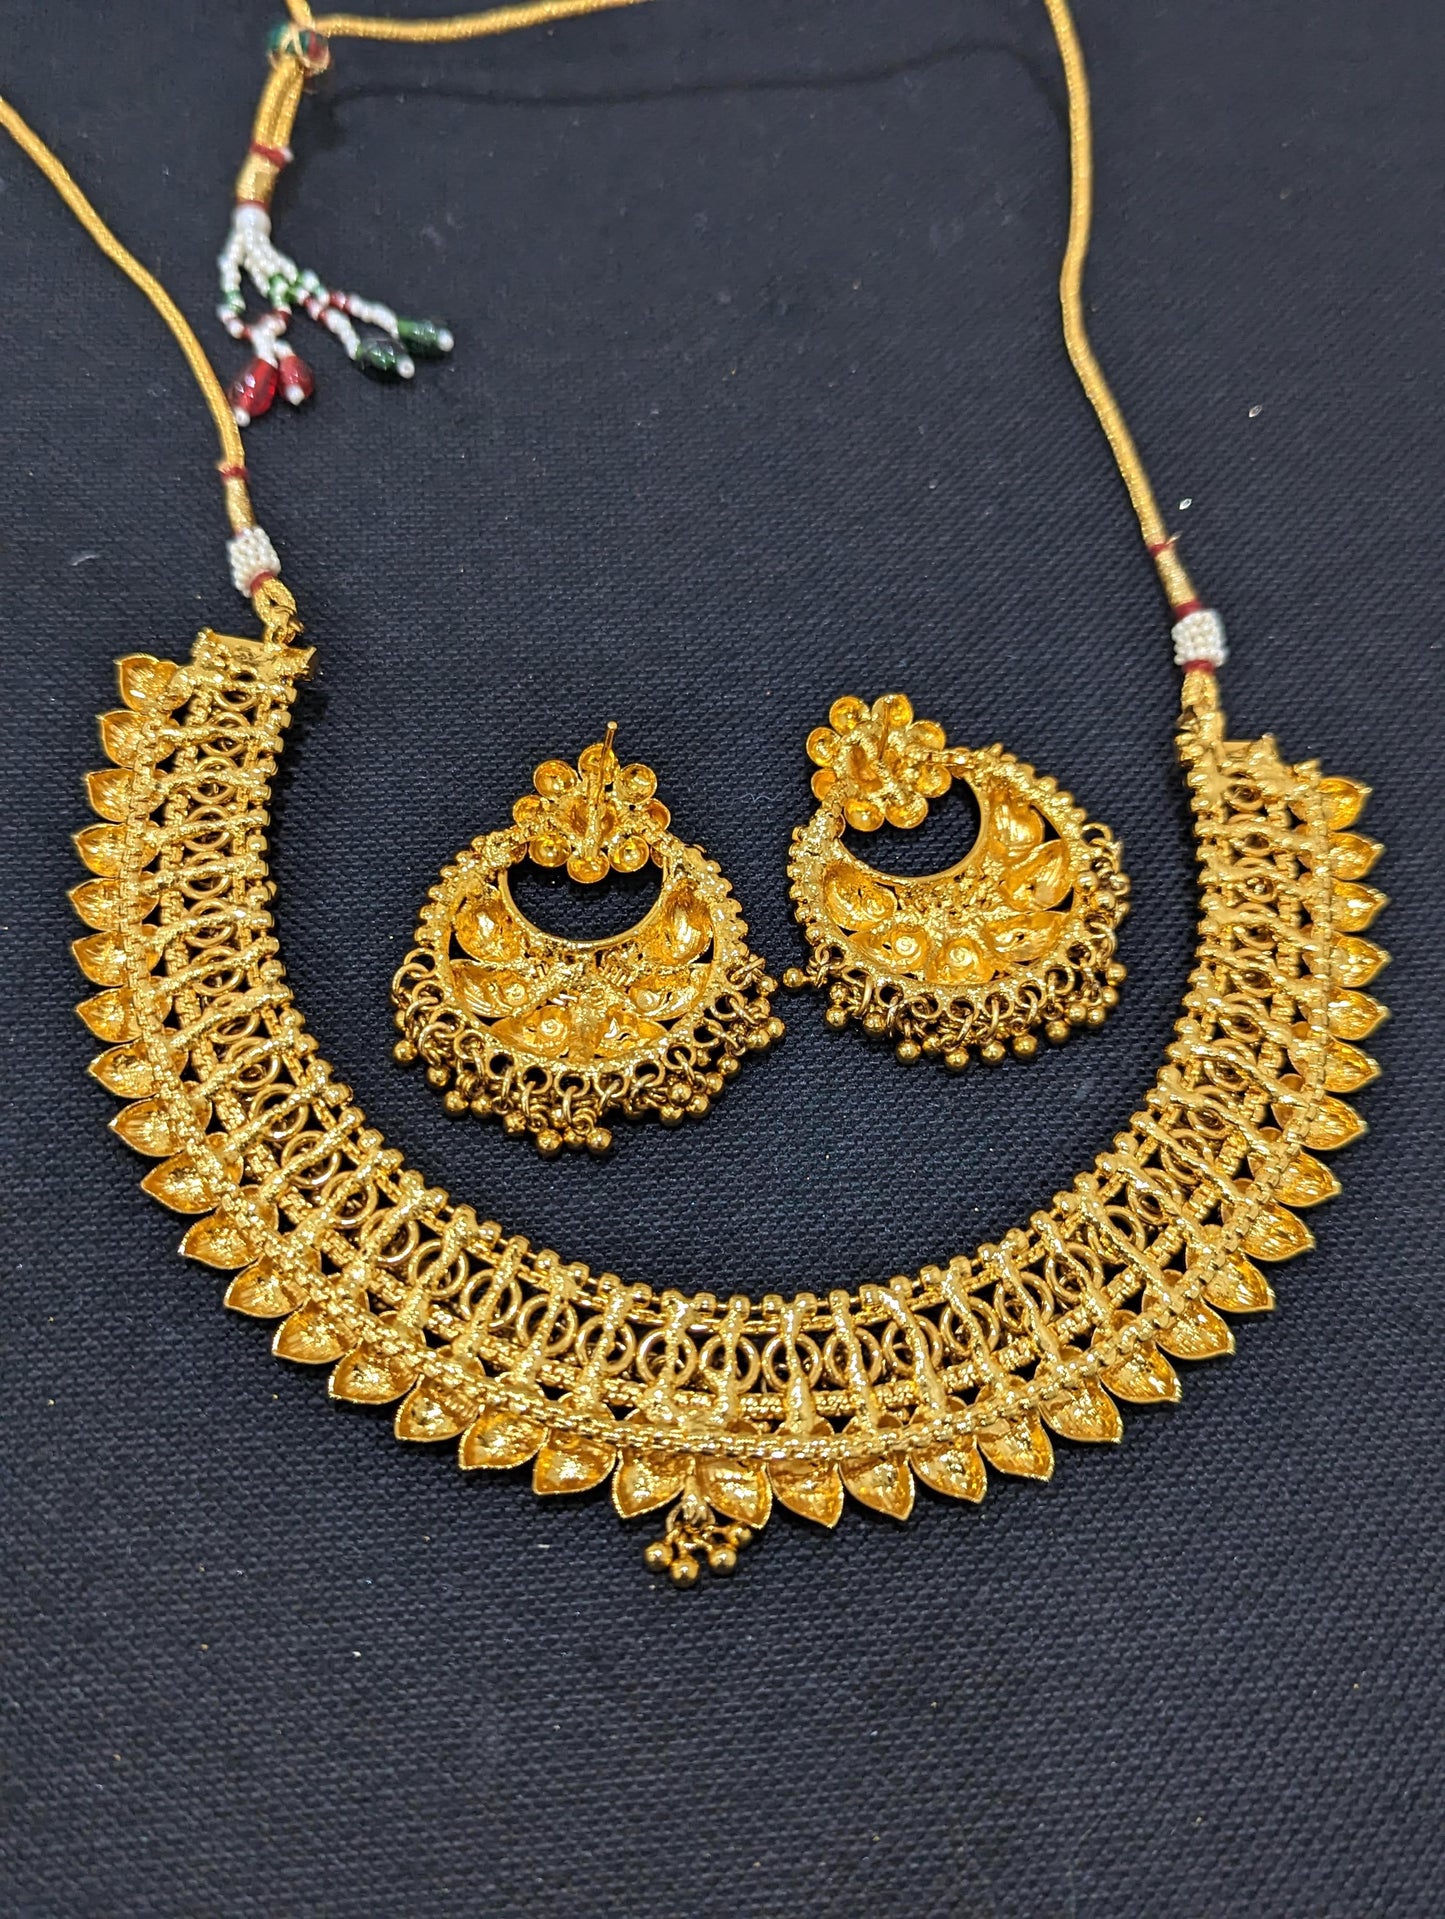 Gold plated Broad Choker Necklace and Earrings set